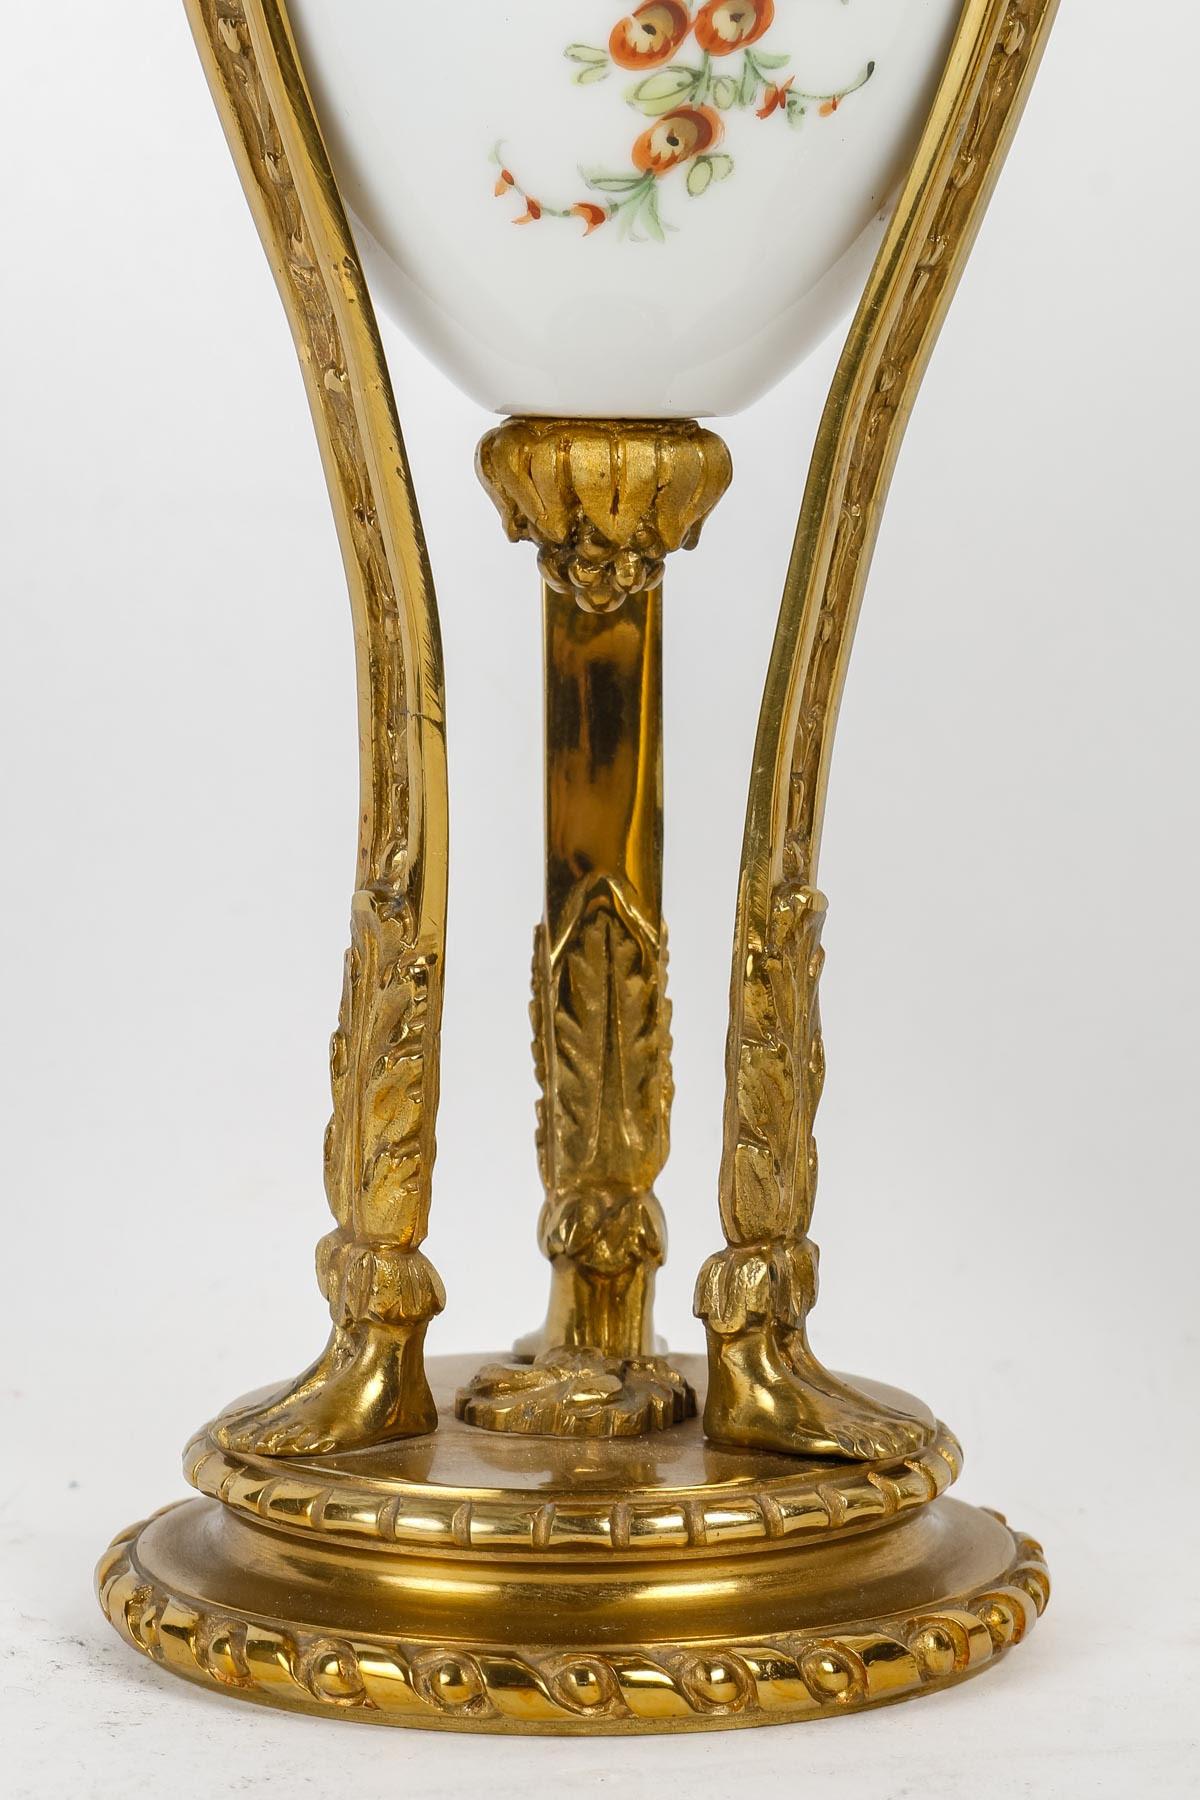 Gilt Pair of Perfume Burners from the Manufacture de Sèvres, Early 20th Century. For Sale